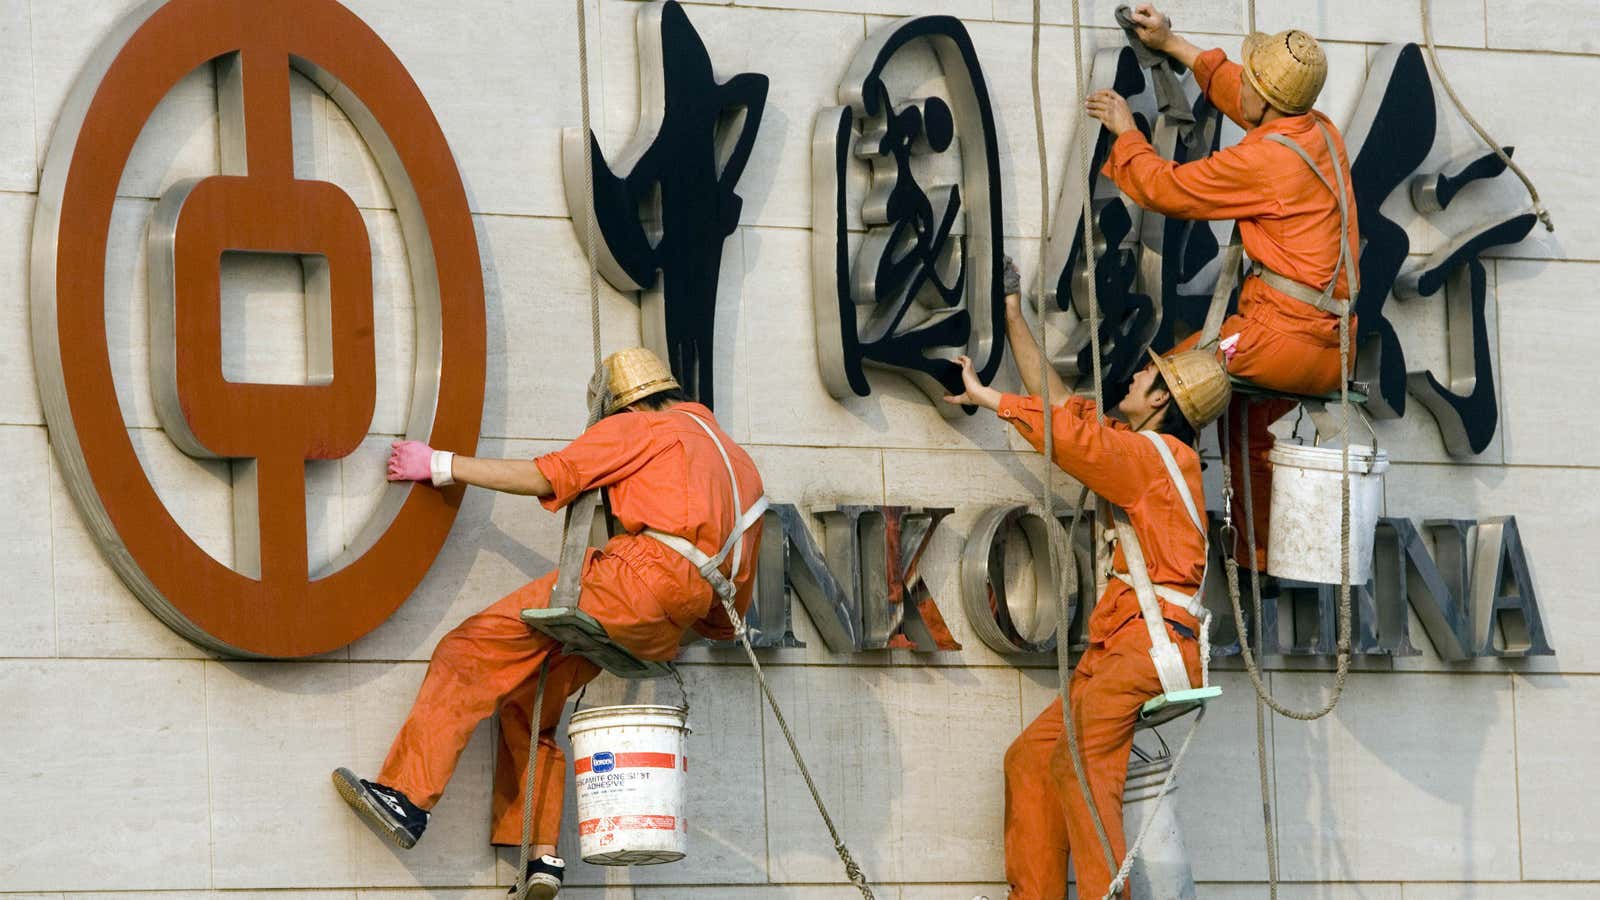 Cleaning up Chinese banks will be precarious work.